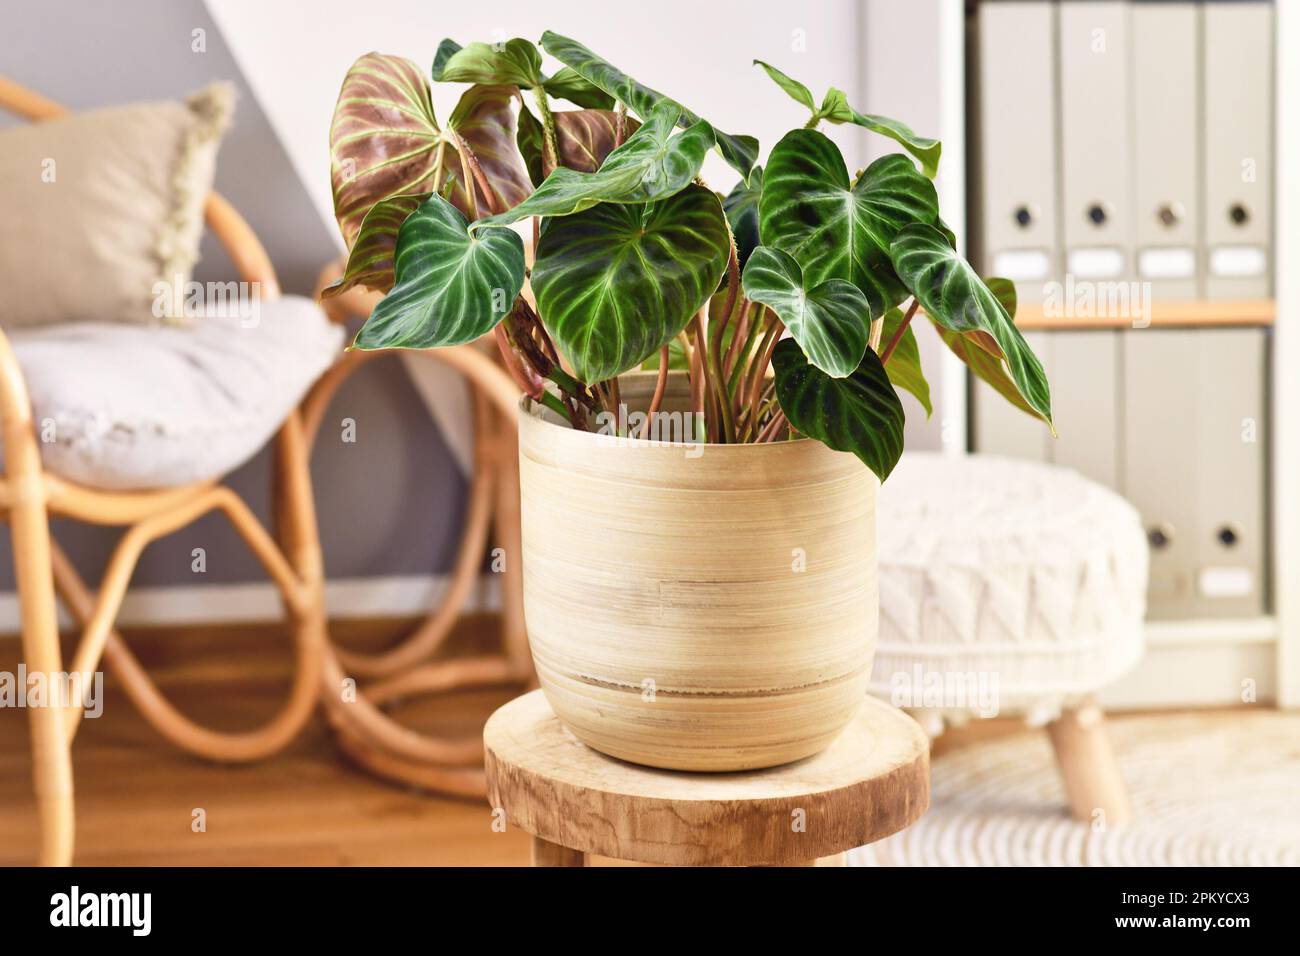 Topical 'Philodendron Verrucosum' houseplant with dark green veined velvety leaves in flower pot Stock Photo